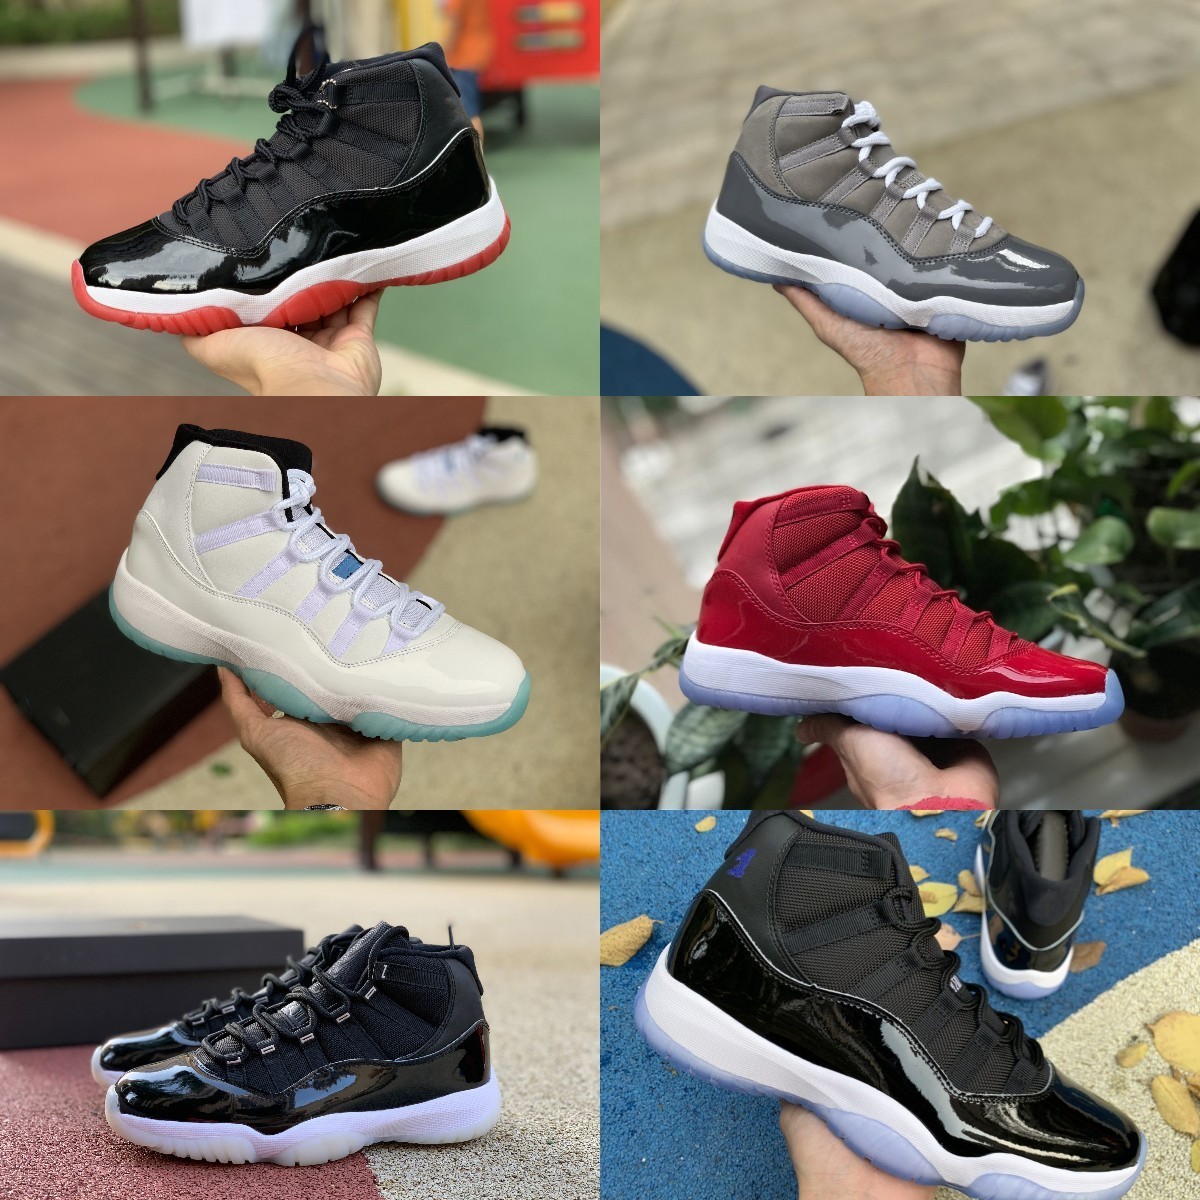 

TOP Quality Jubilee 11 11s High Basketball Shoes Jumpman COOL GREY Legend Blue Space Jam Gamma BluePlayoffs Bred Concord 45 Low Columbia White Red Sports Sneakers M58, Please contact us